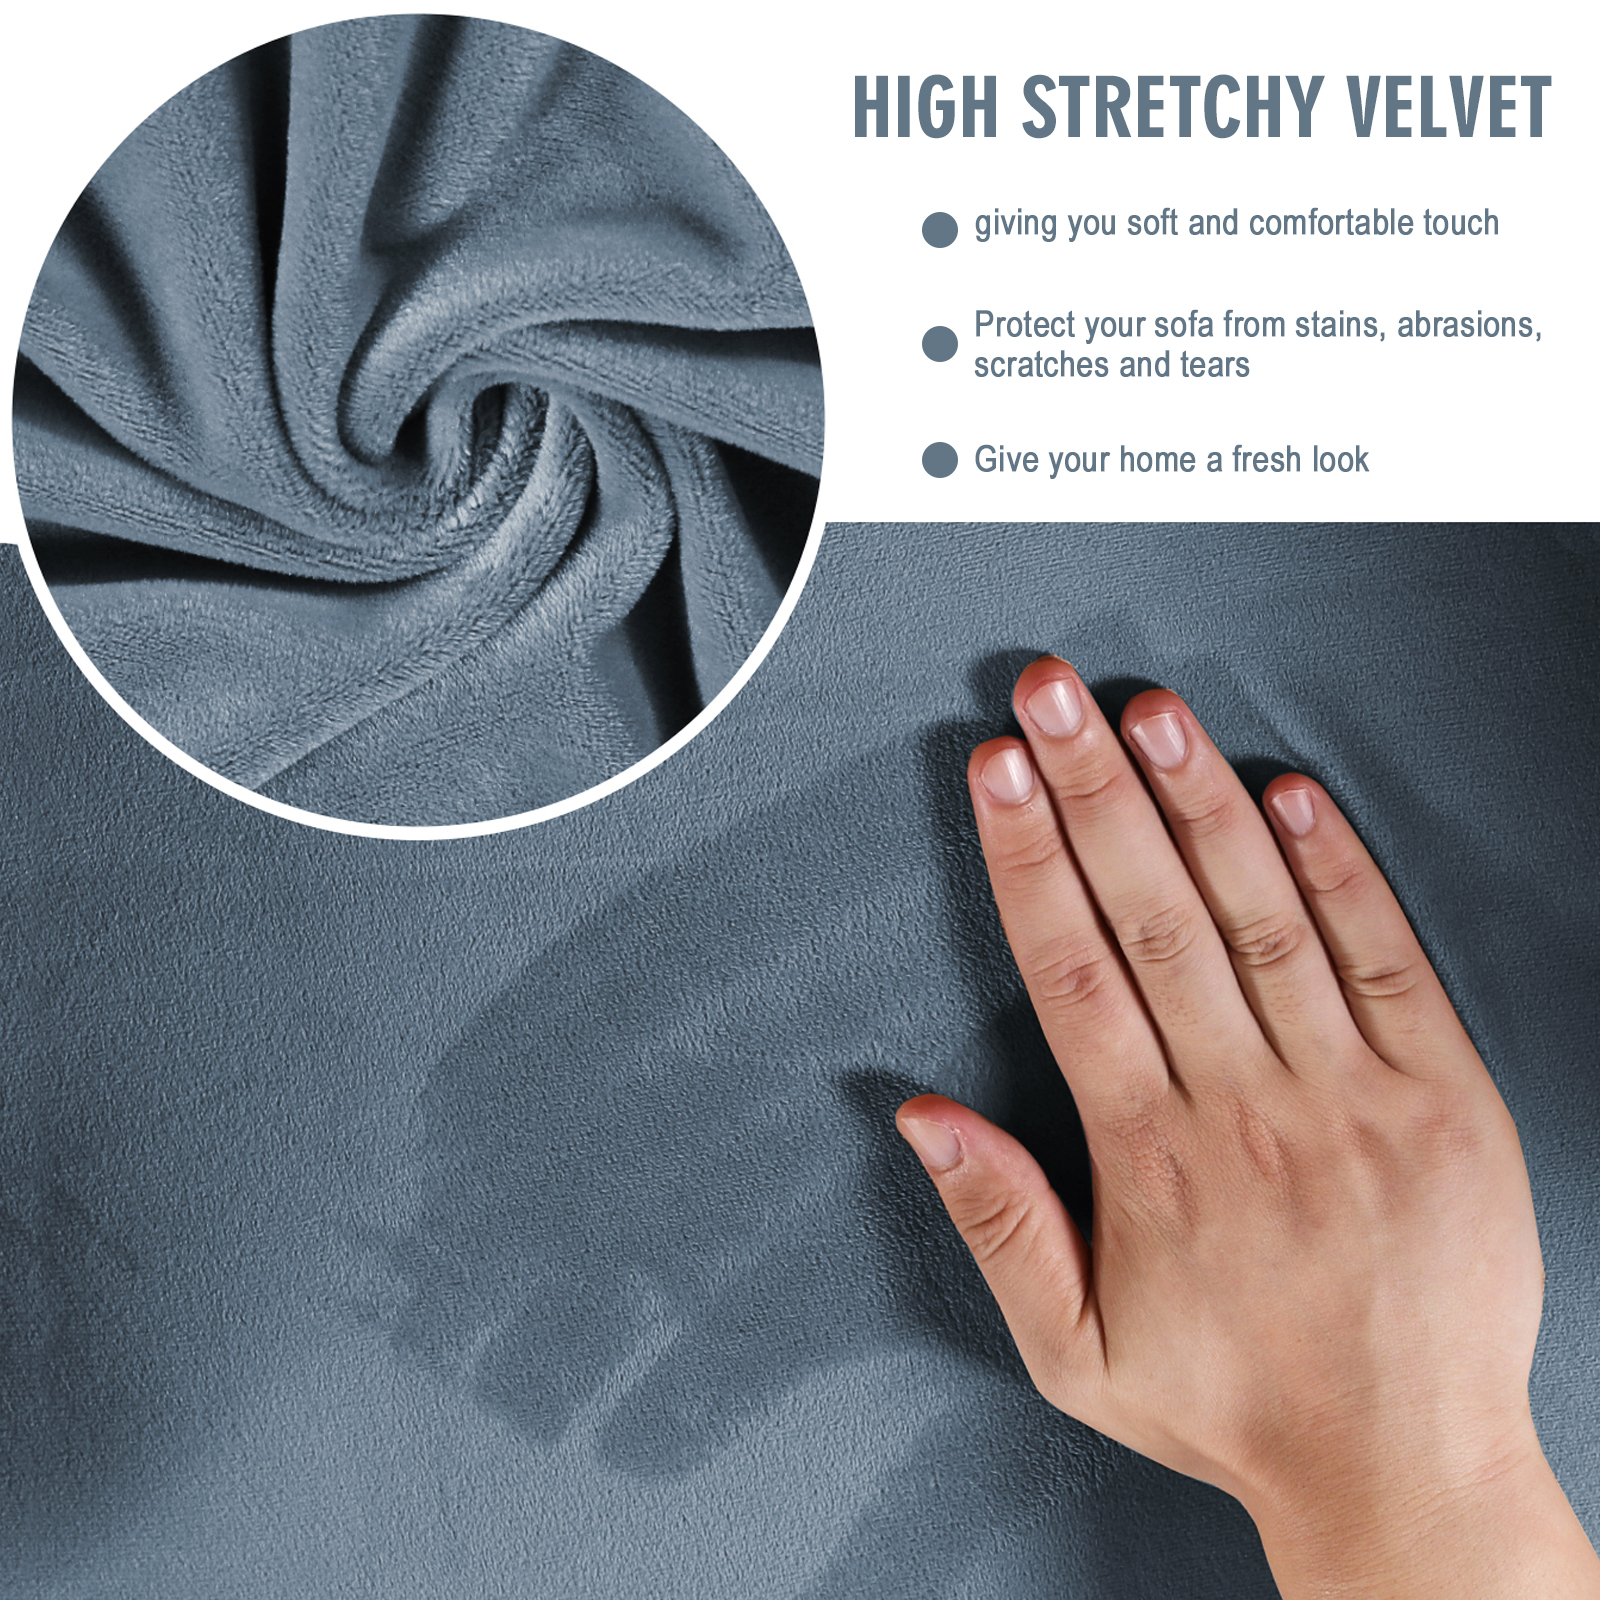 Stretch Velvet Plush Sofa Covers Couch Chair Slipcover Protector ...